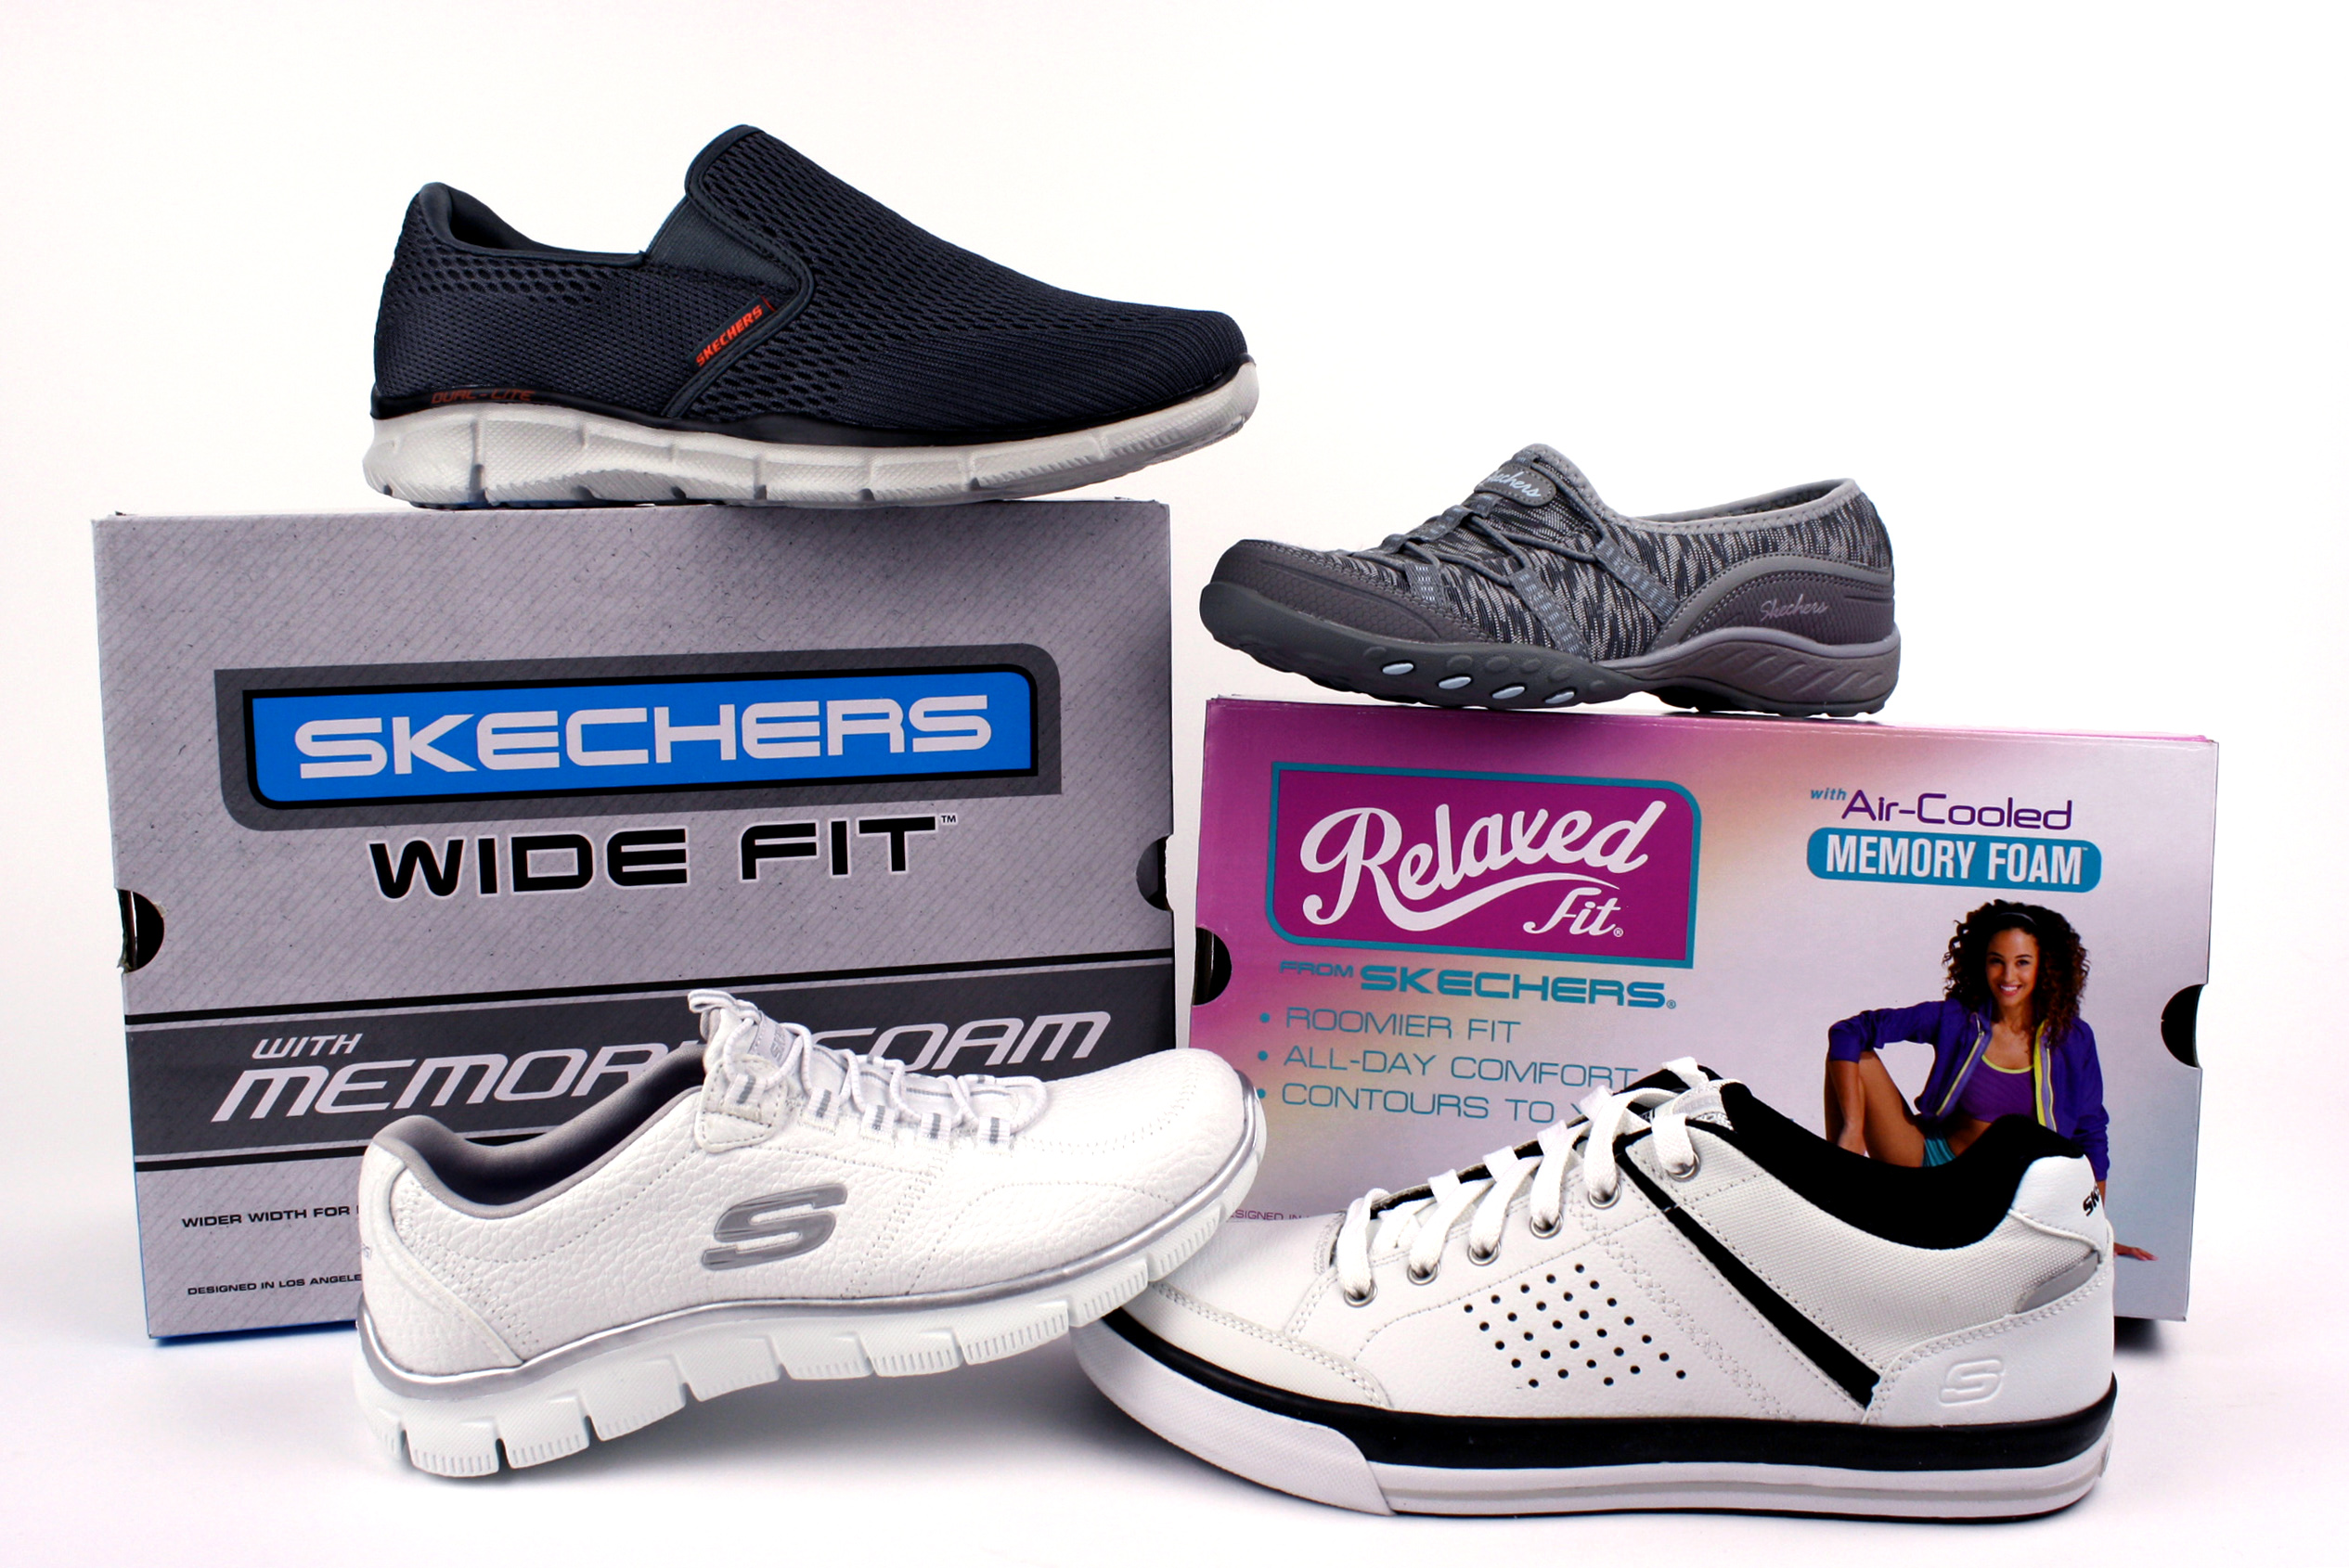 how do you wash skechers shoes